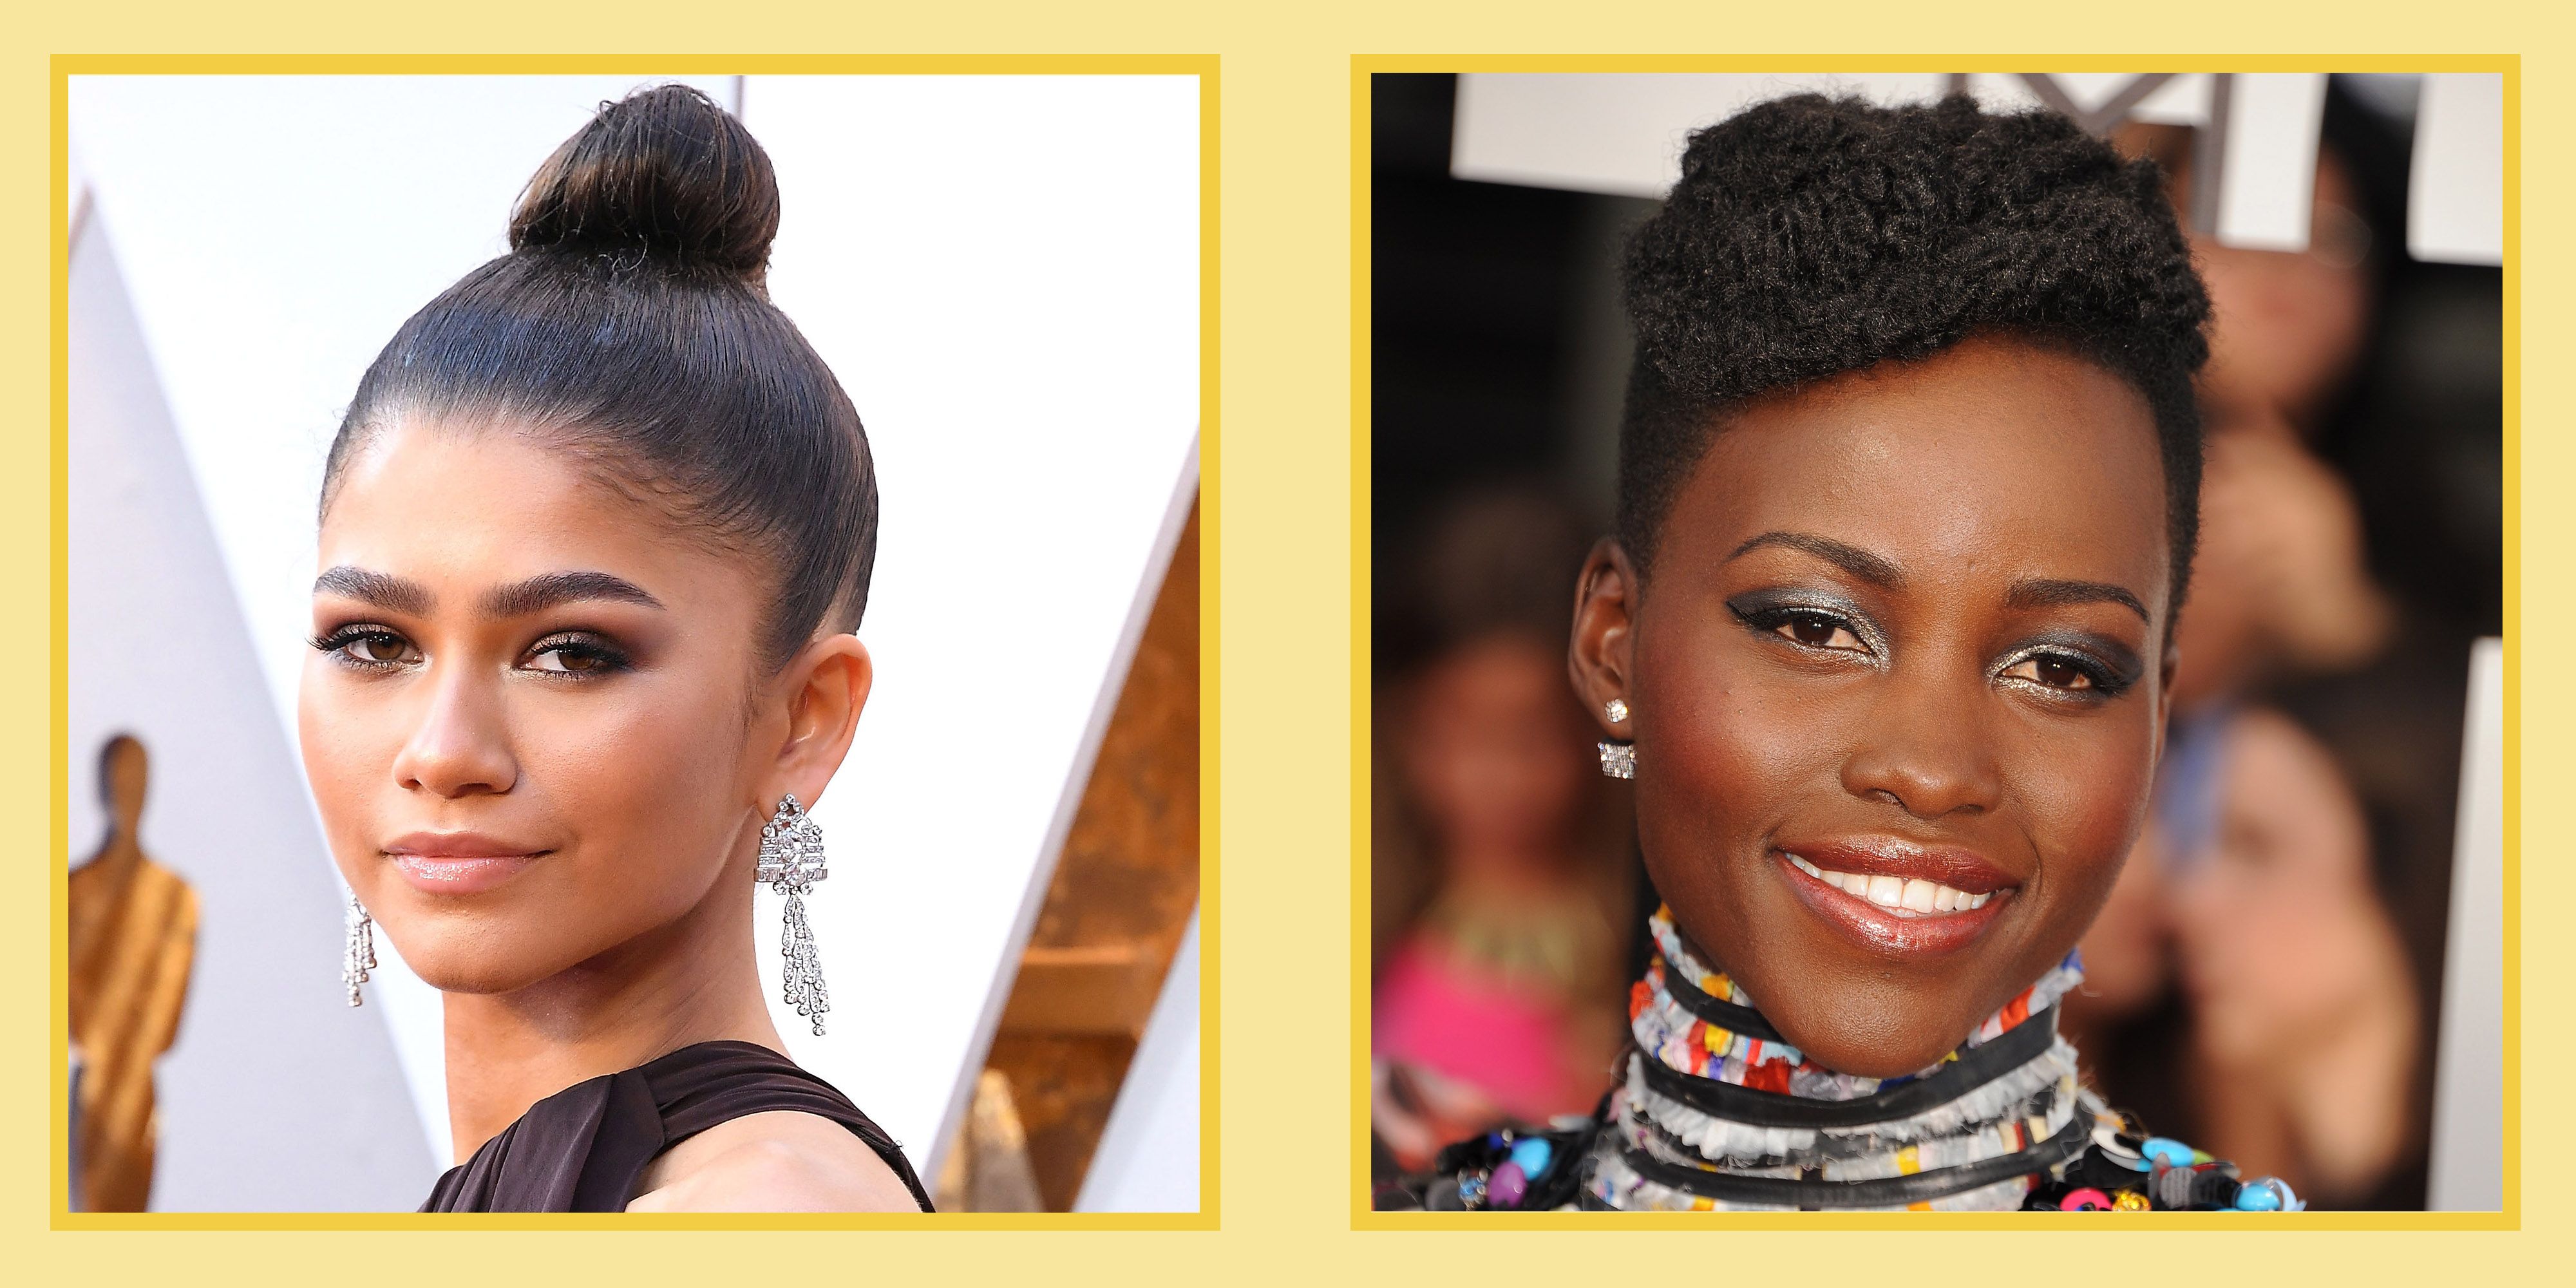 30 Trendy Short Updo Styles for Any Occasion